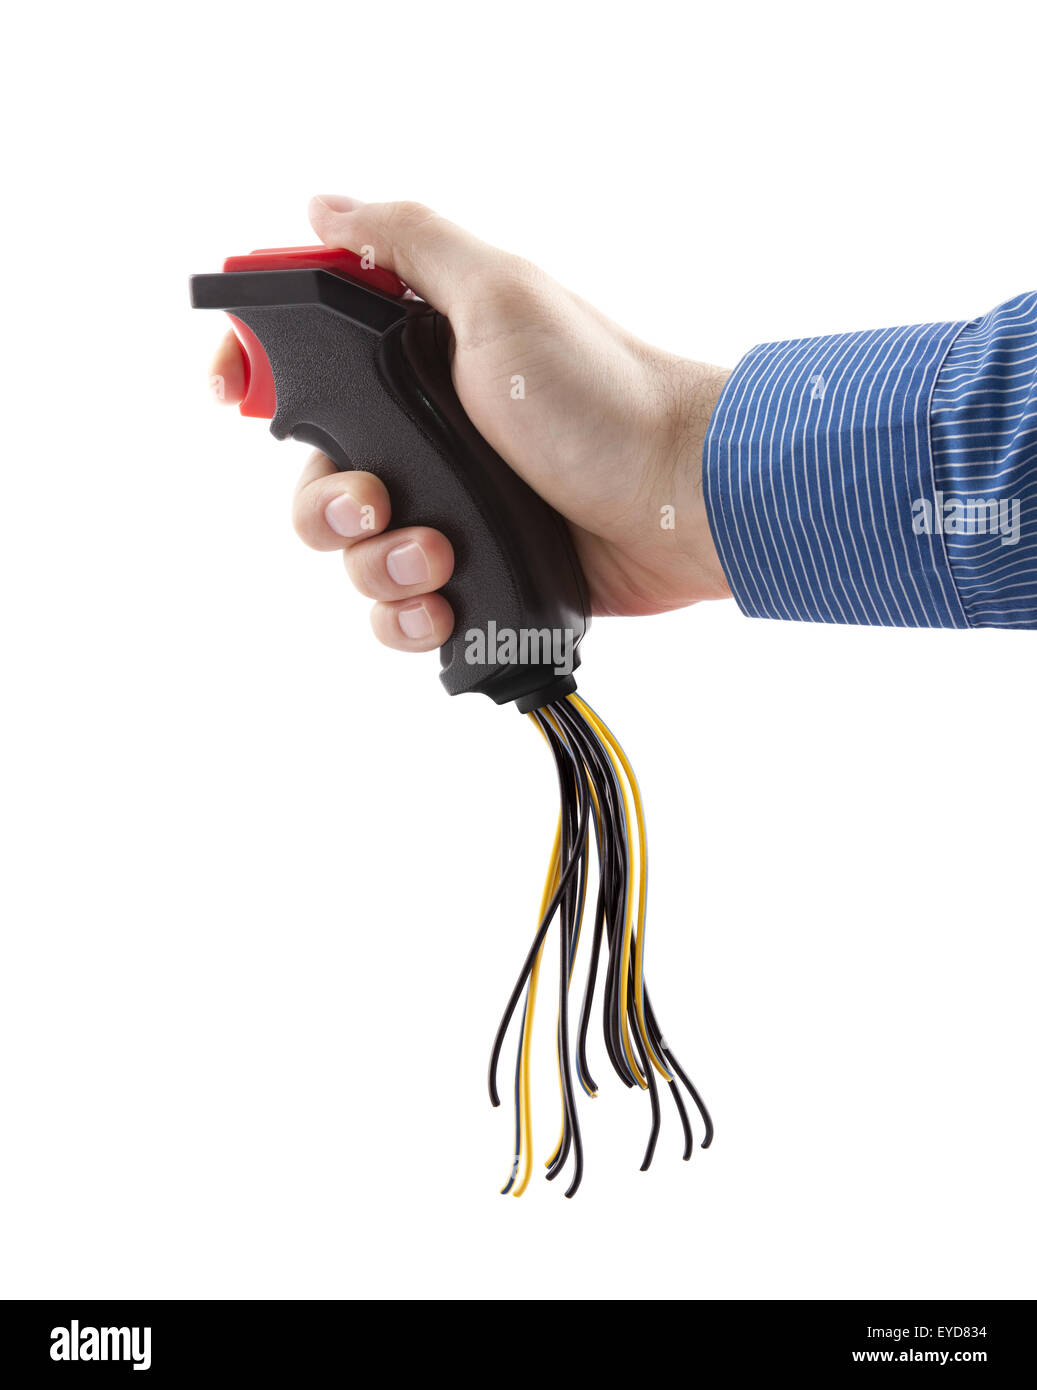 Computer joystick with cables in hand isolated on white Stock Photo